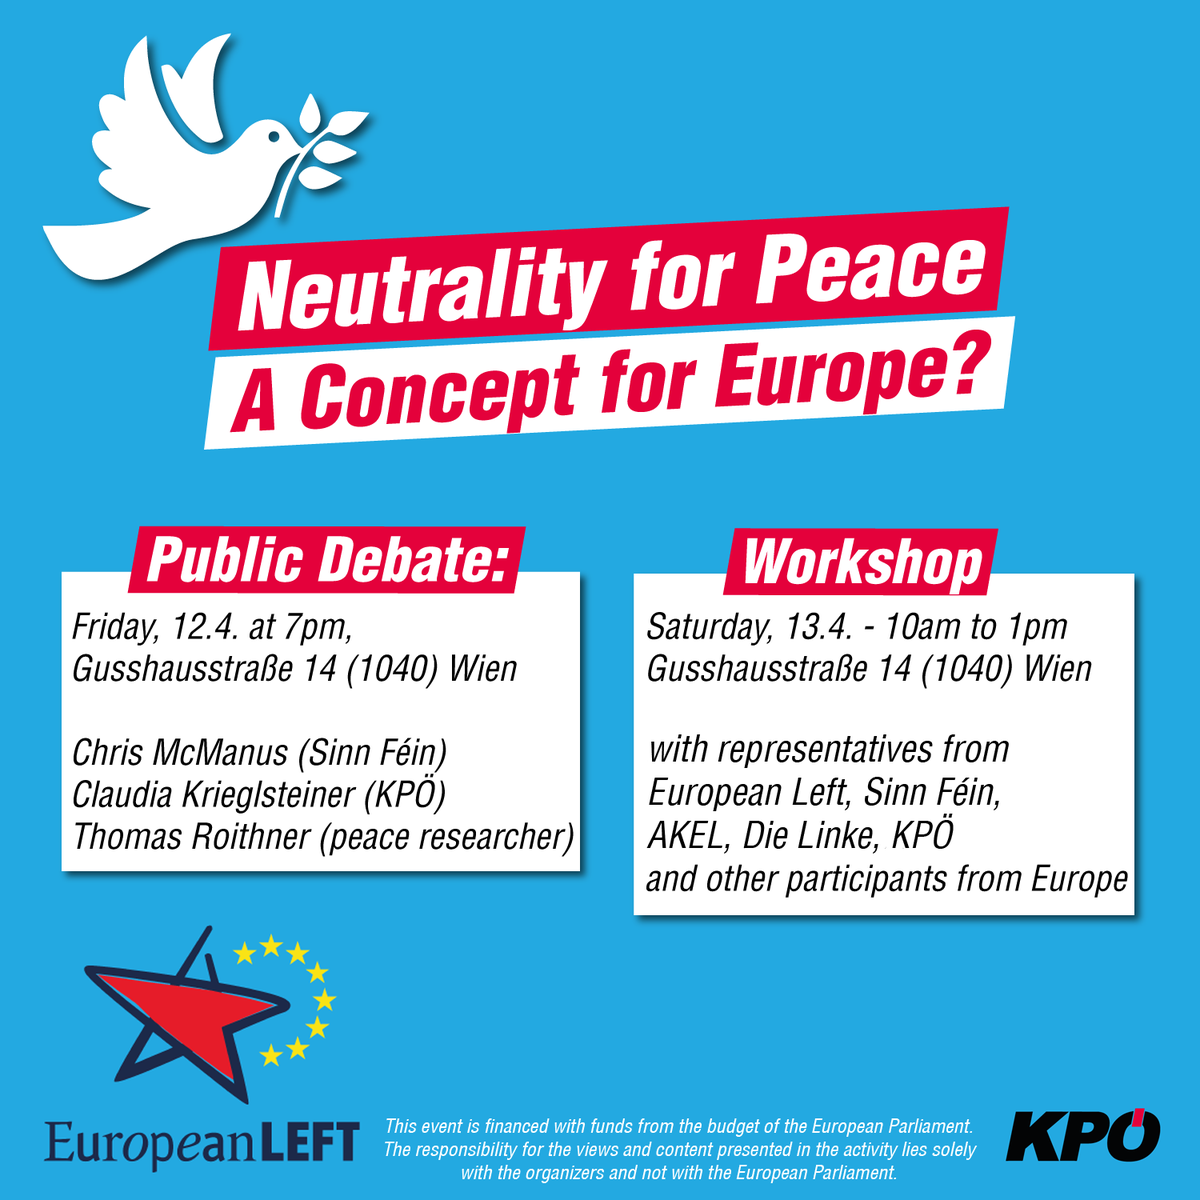 This weekend, @KPOE_EL and @europeanleft organise in Vienna a seminar on neutrality and peace, focused on Ireland, Austria, Cyprus and Malta, with MEP @MacManusChris (@sinnfeinireland), representatives of @AKEL1926, @dieLinke and civil society participants @t_roithner